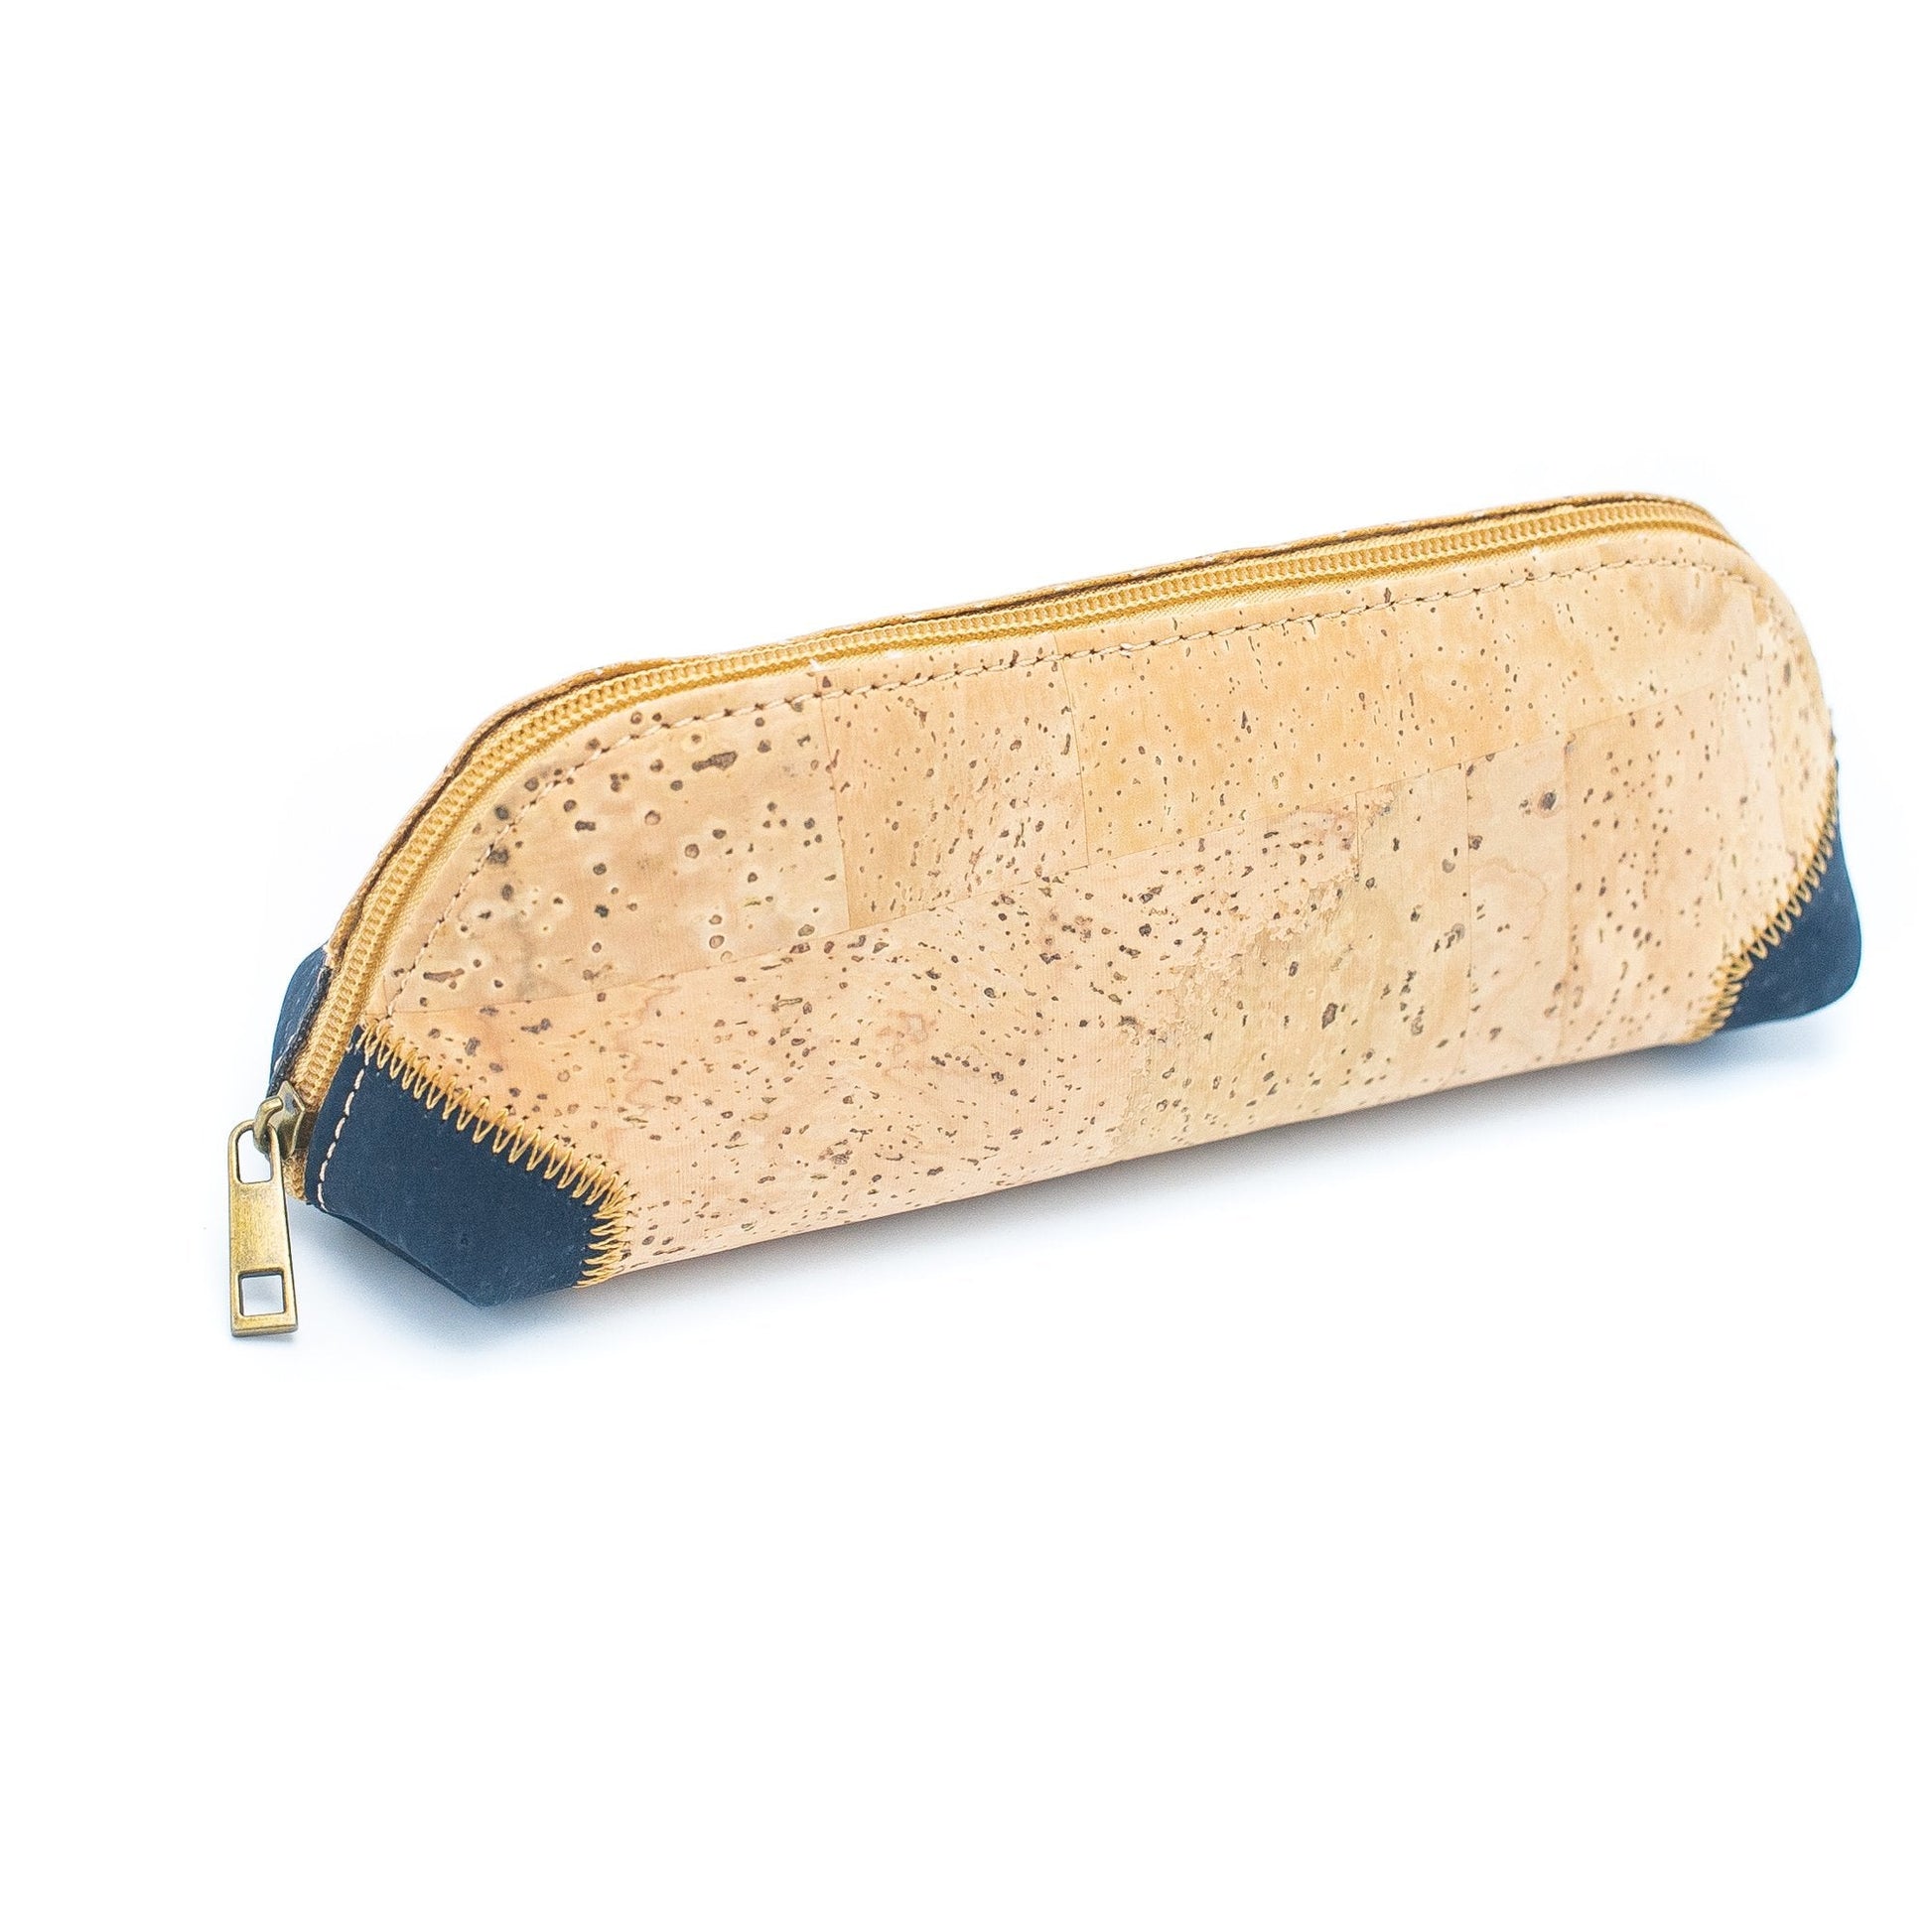 Natural Cork w/ Blue Conners Curved Compact Vegan Pencil Case (5 units) | THE CORK COLLECTION